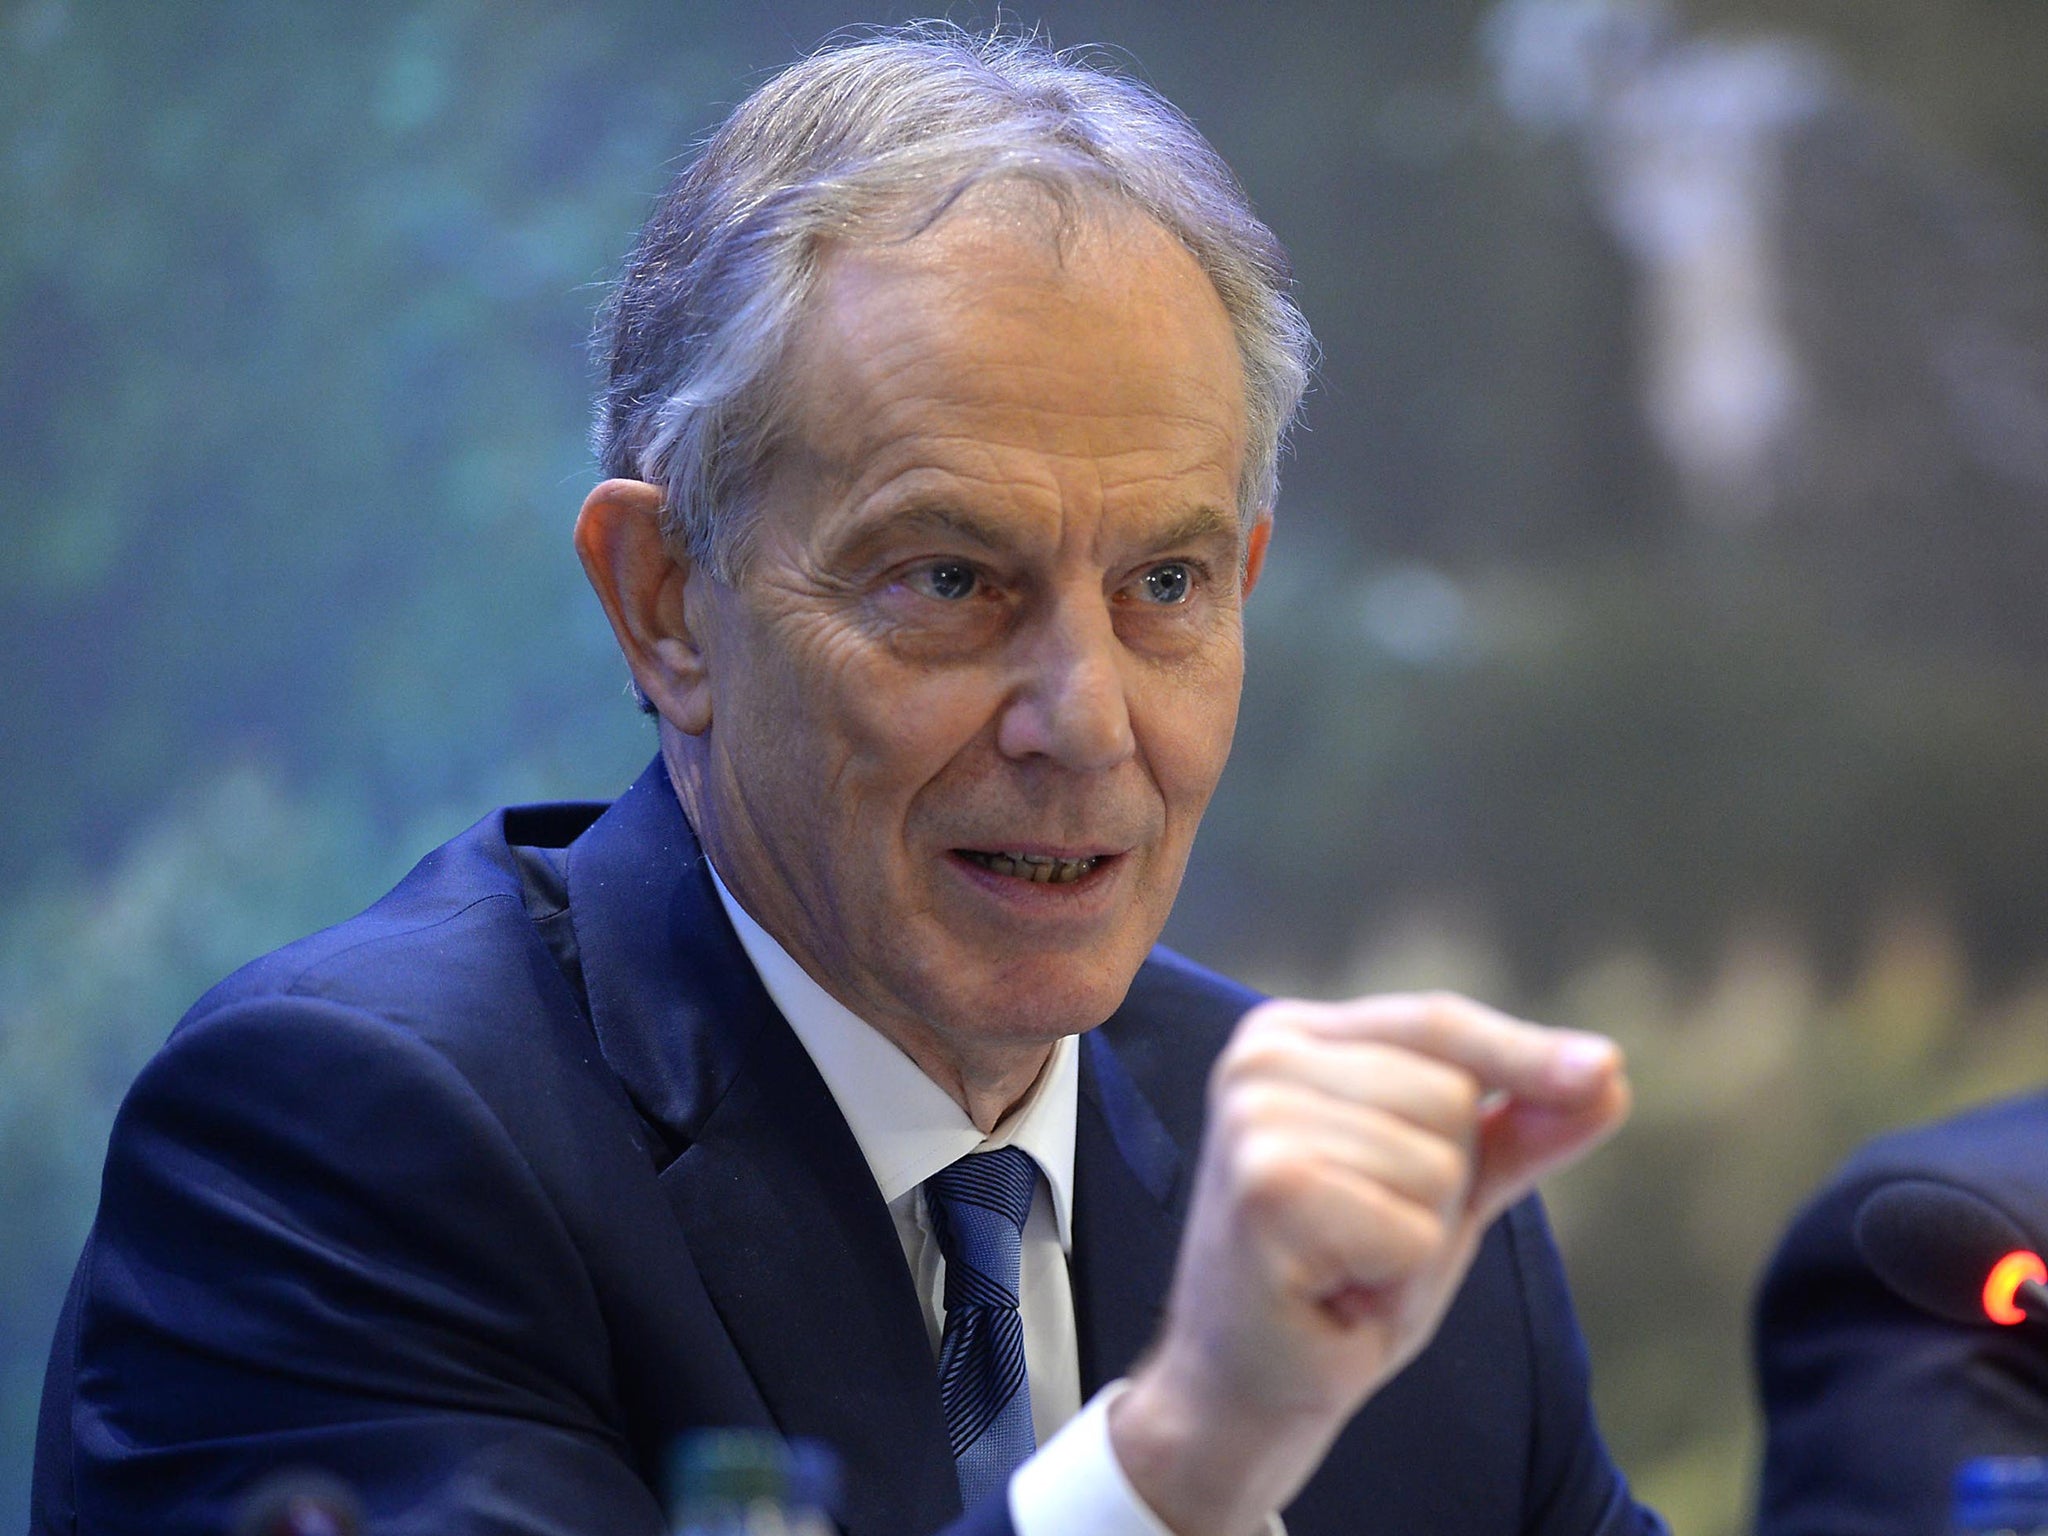 Tony Blair has detailed that he believes Brexit can be stopped